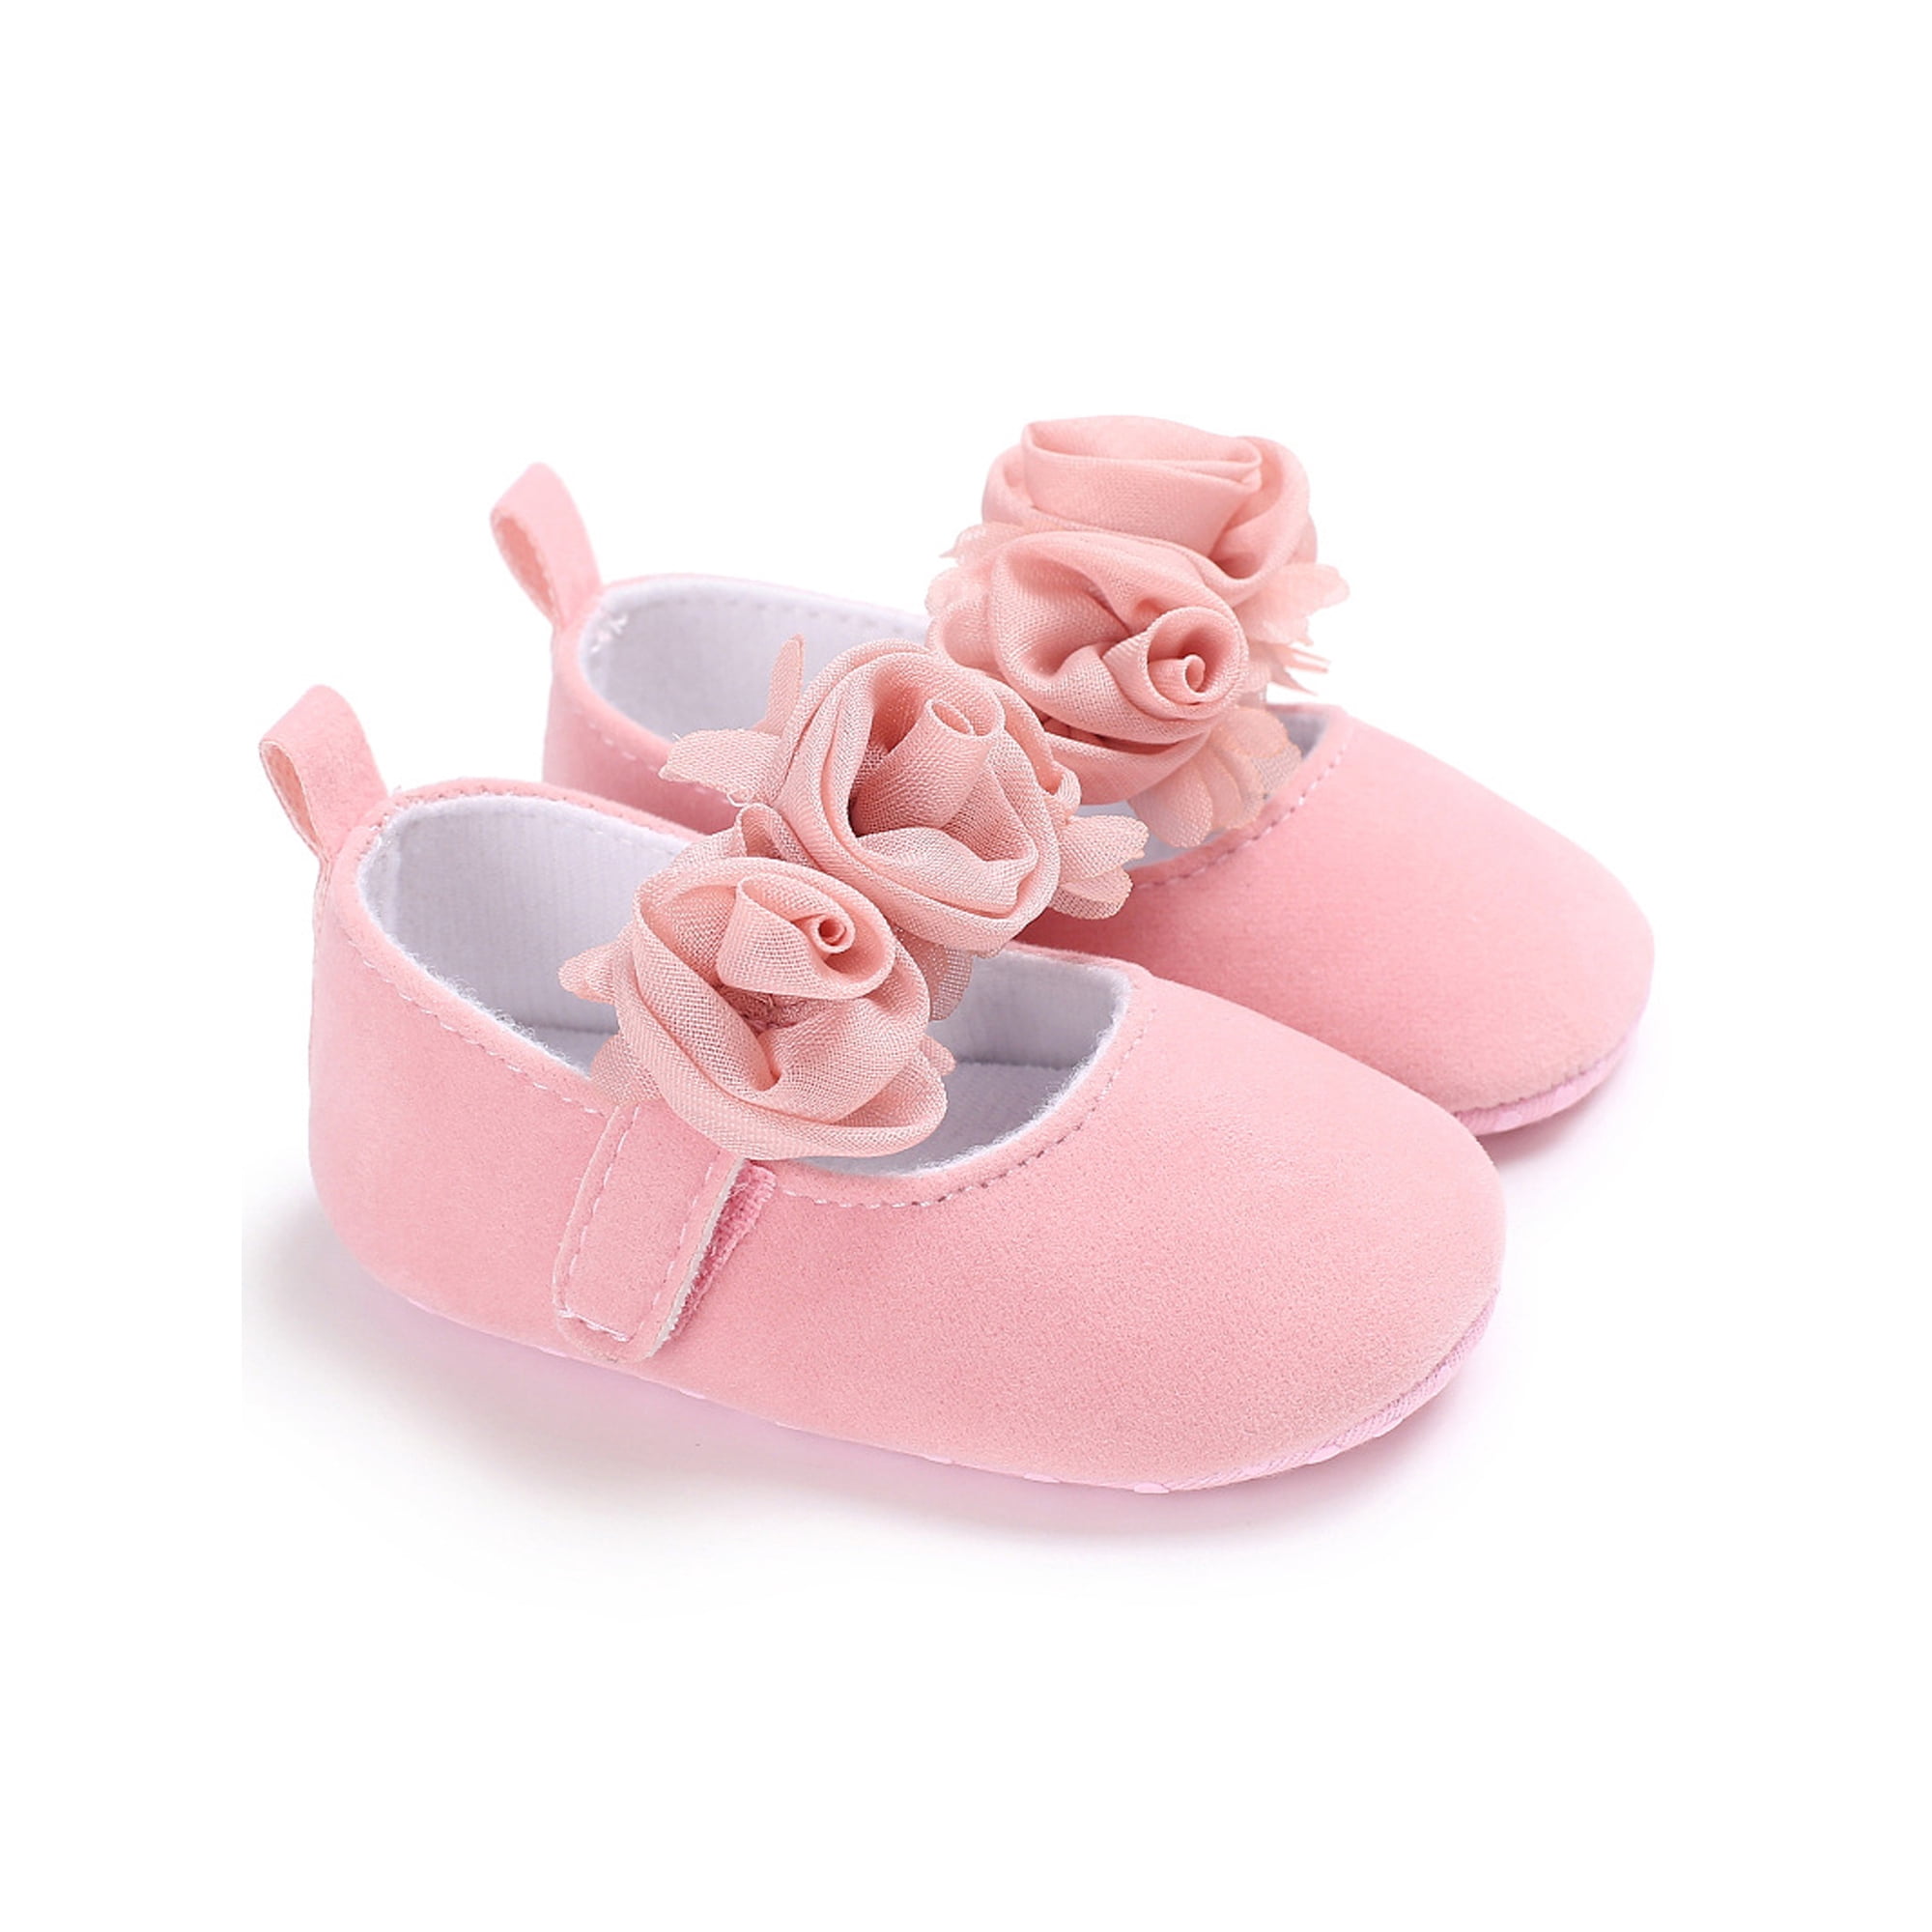 Newborn Baby Girl Crib Shoes Infant Party Dress Princess Shoes